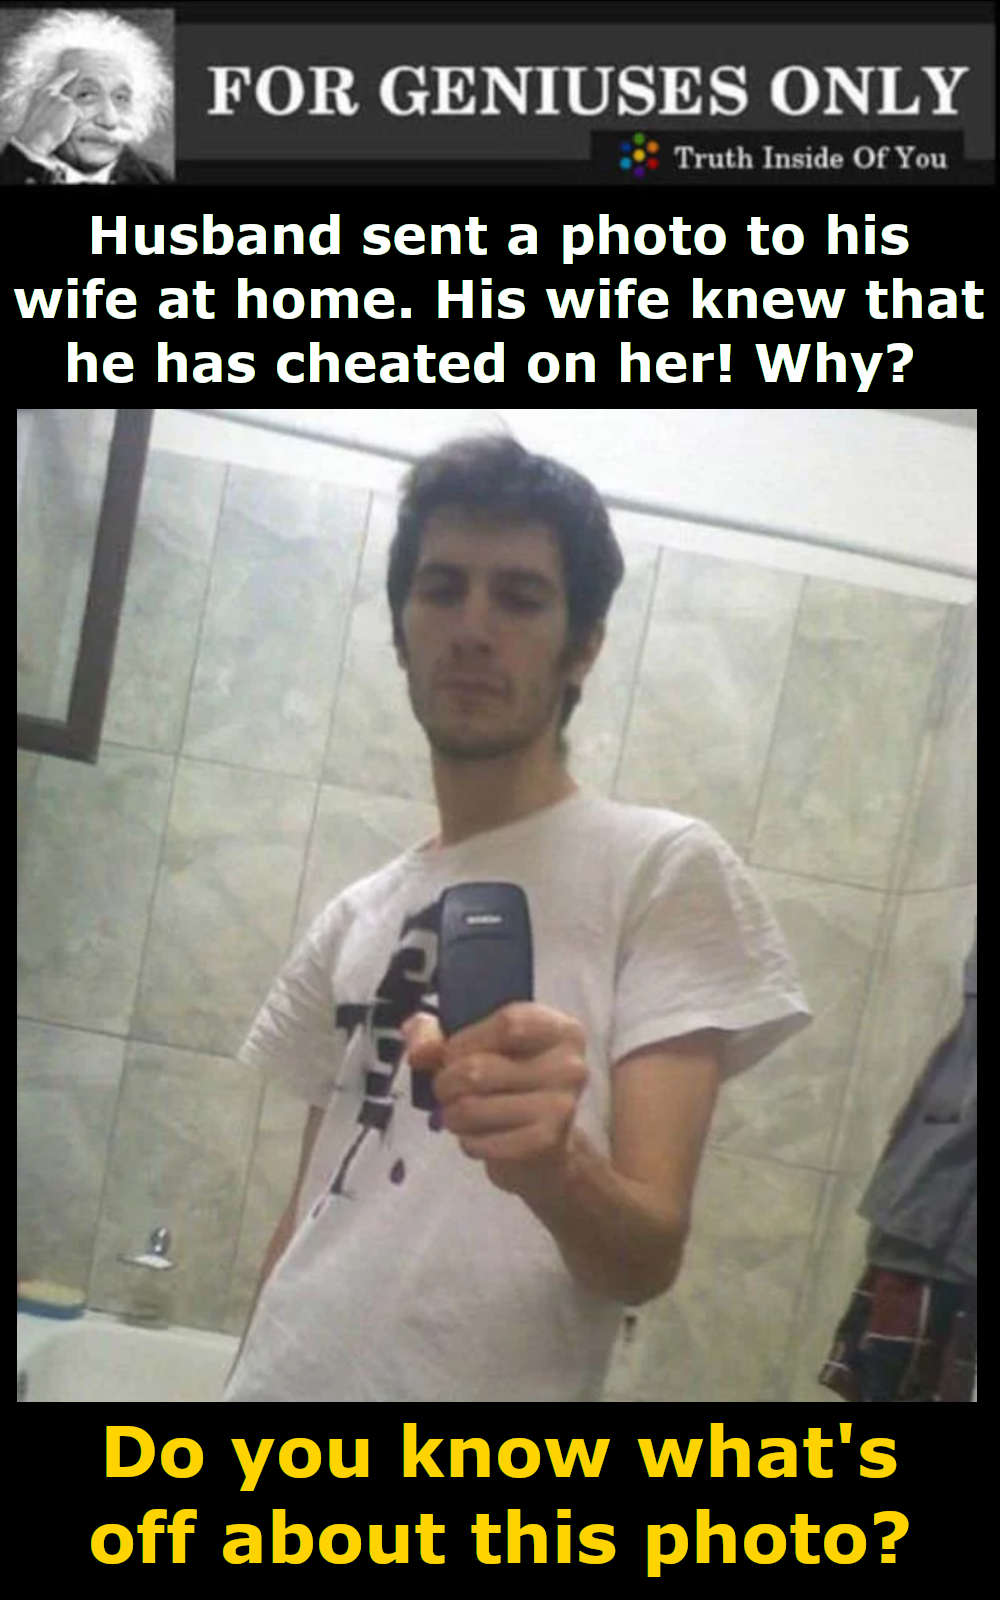 Husband sent a photo to his wife at home. His wife knew that he has cheated on her! Why?